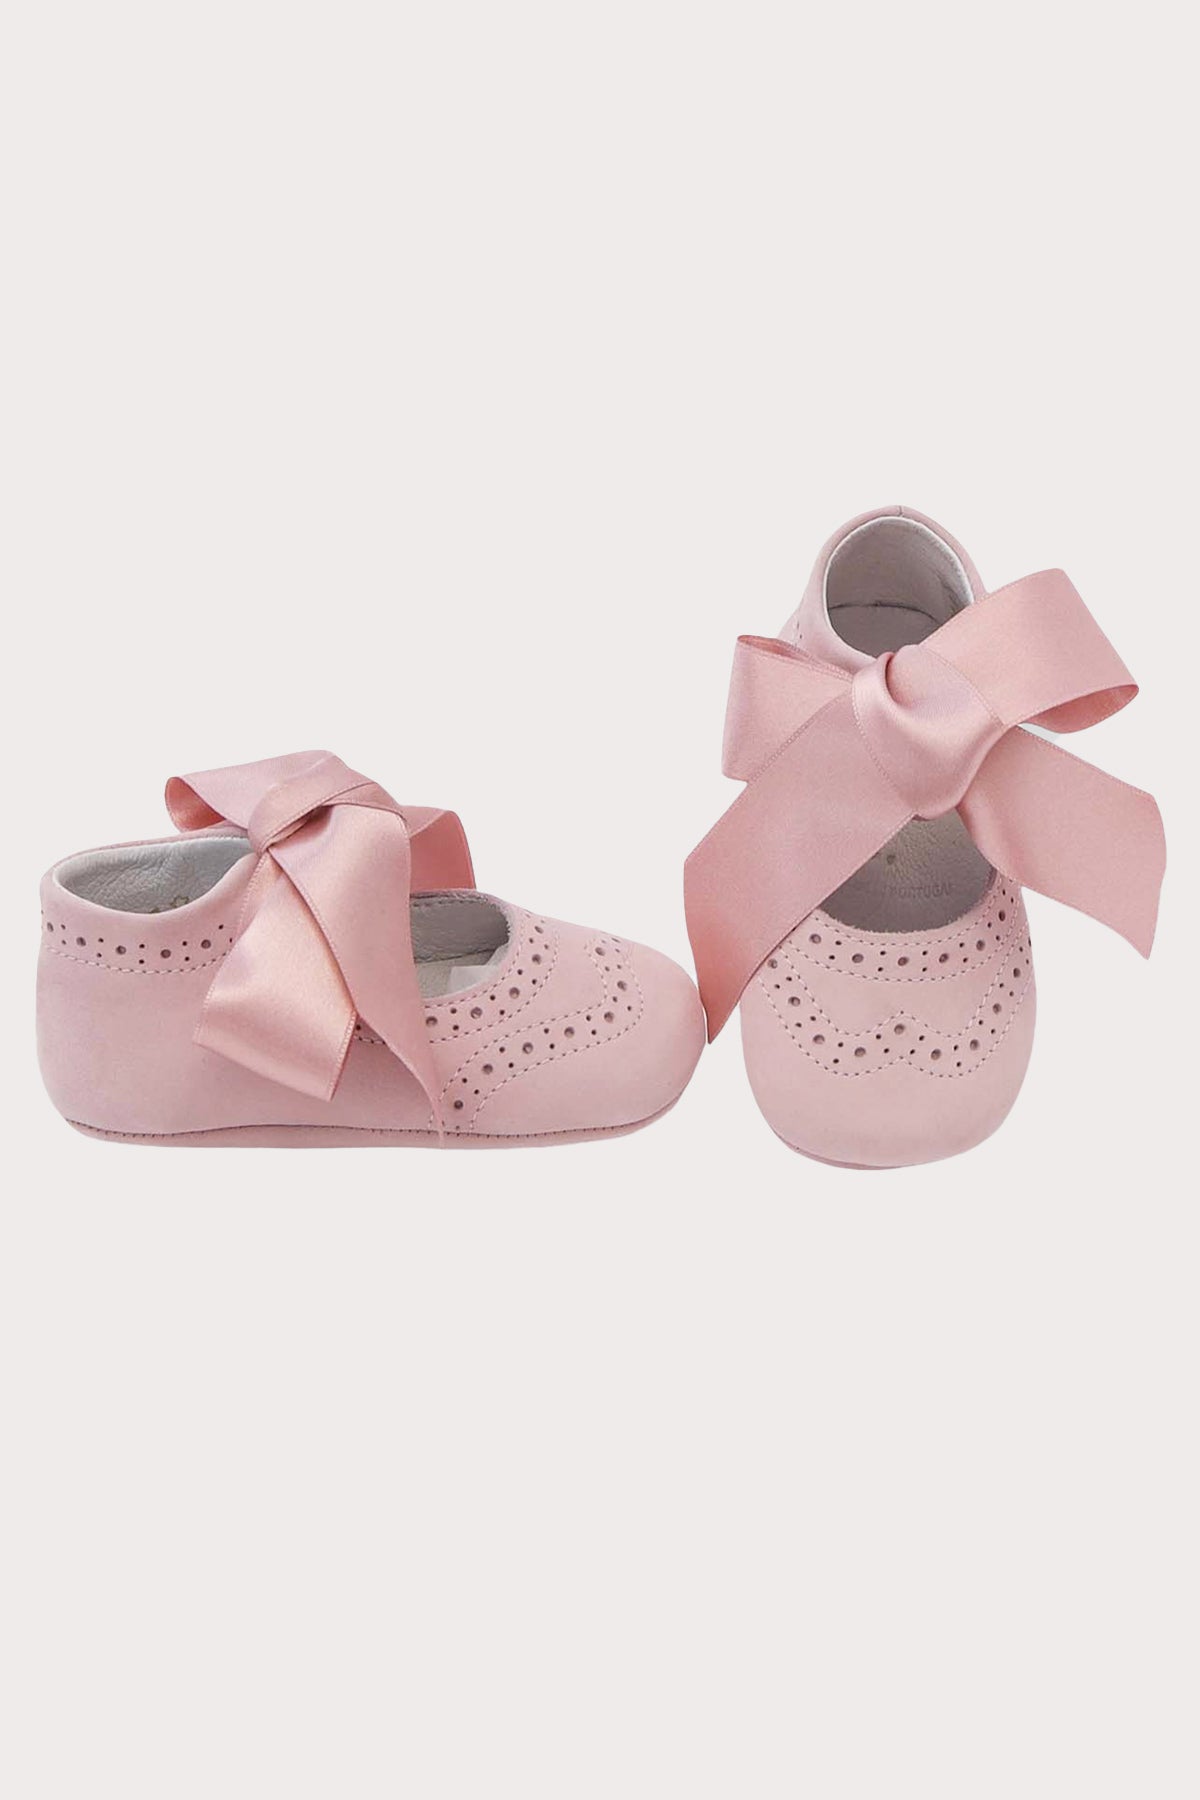 pink leather baby girl shoes